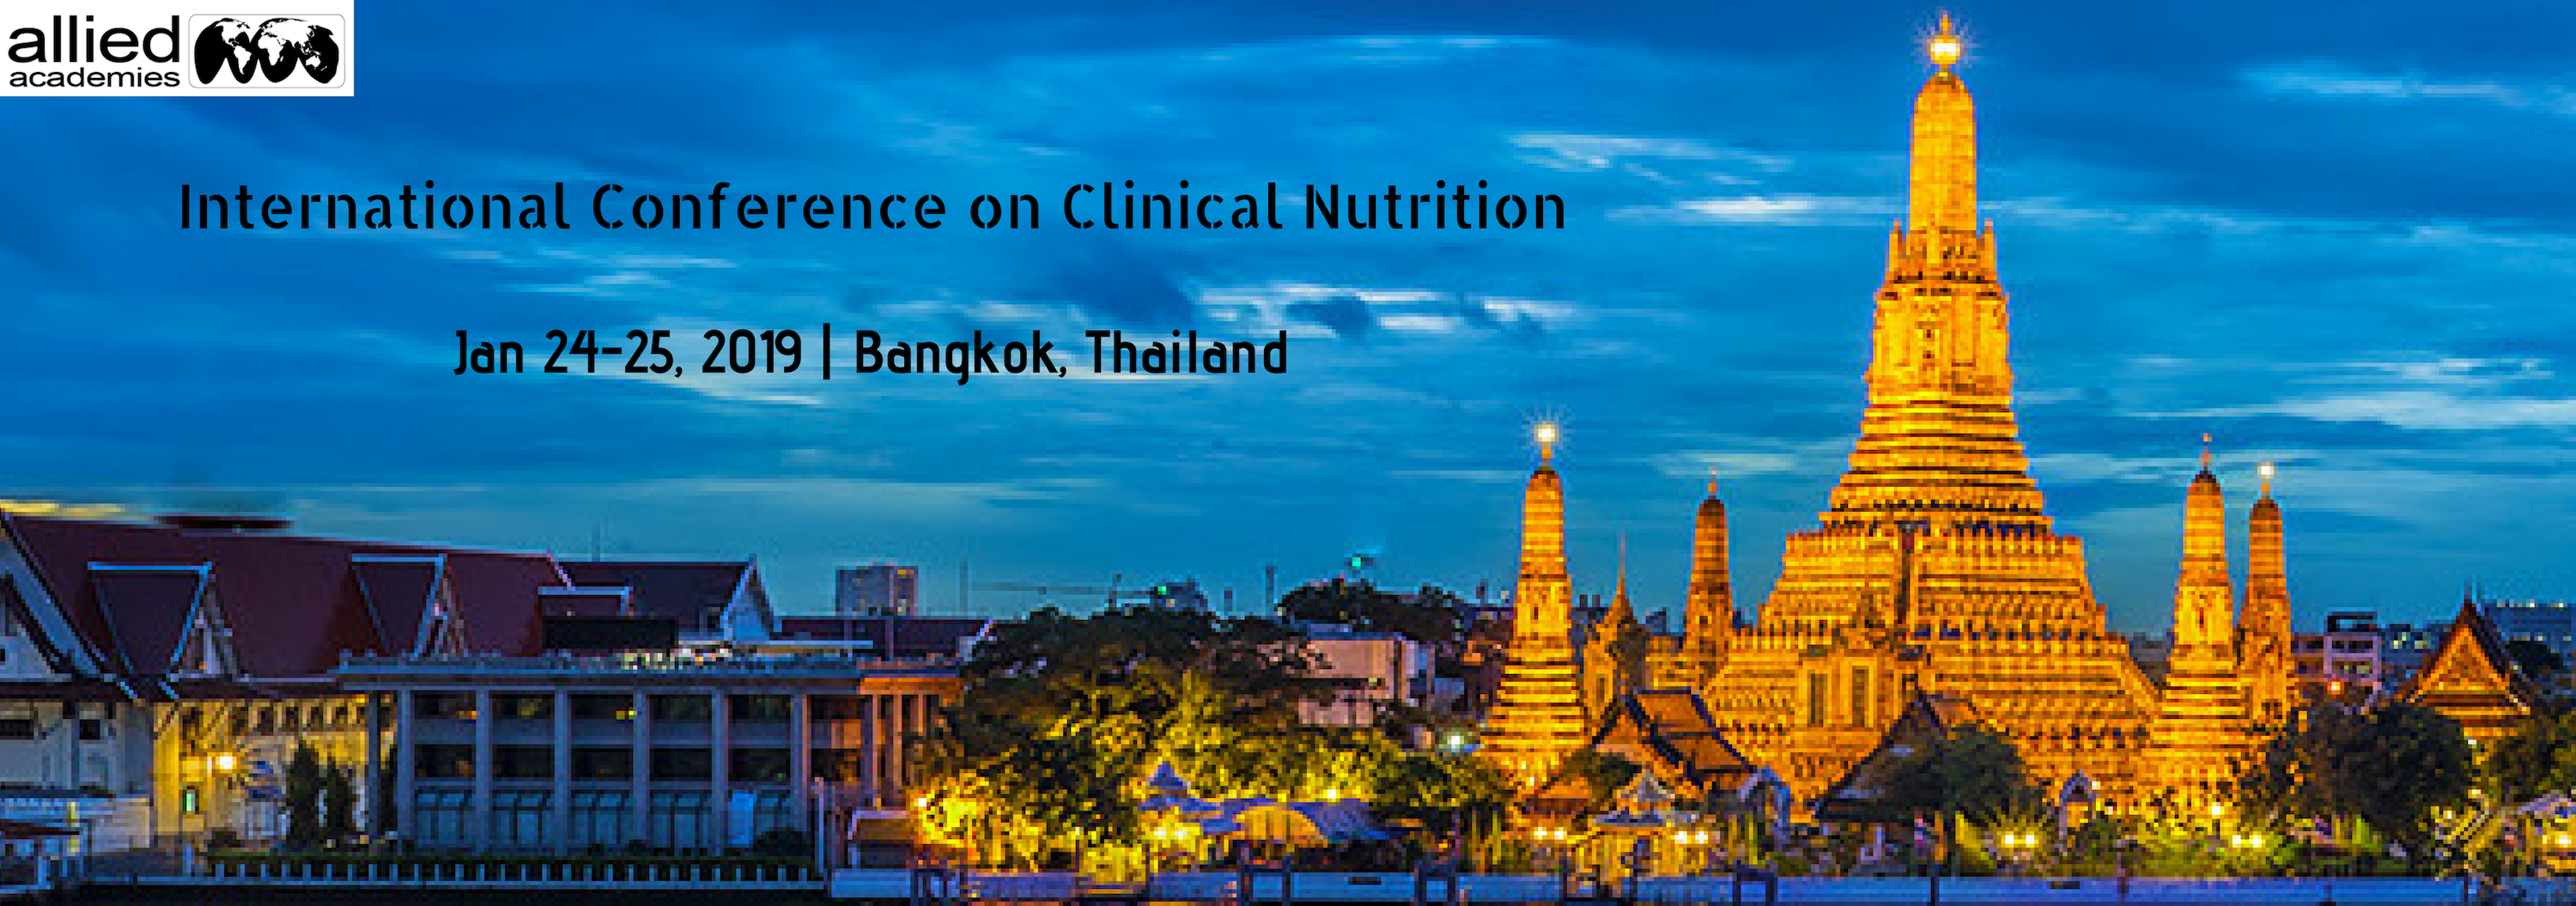 Photos of International Conference on Clinical Nutrition